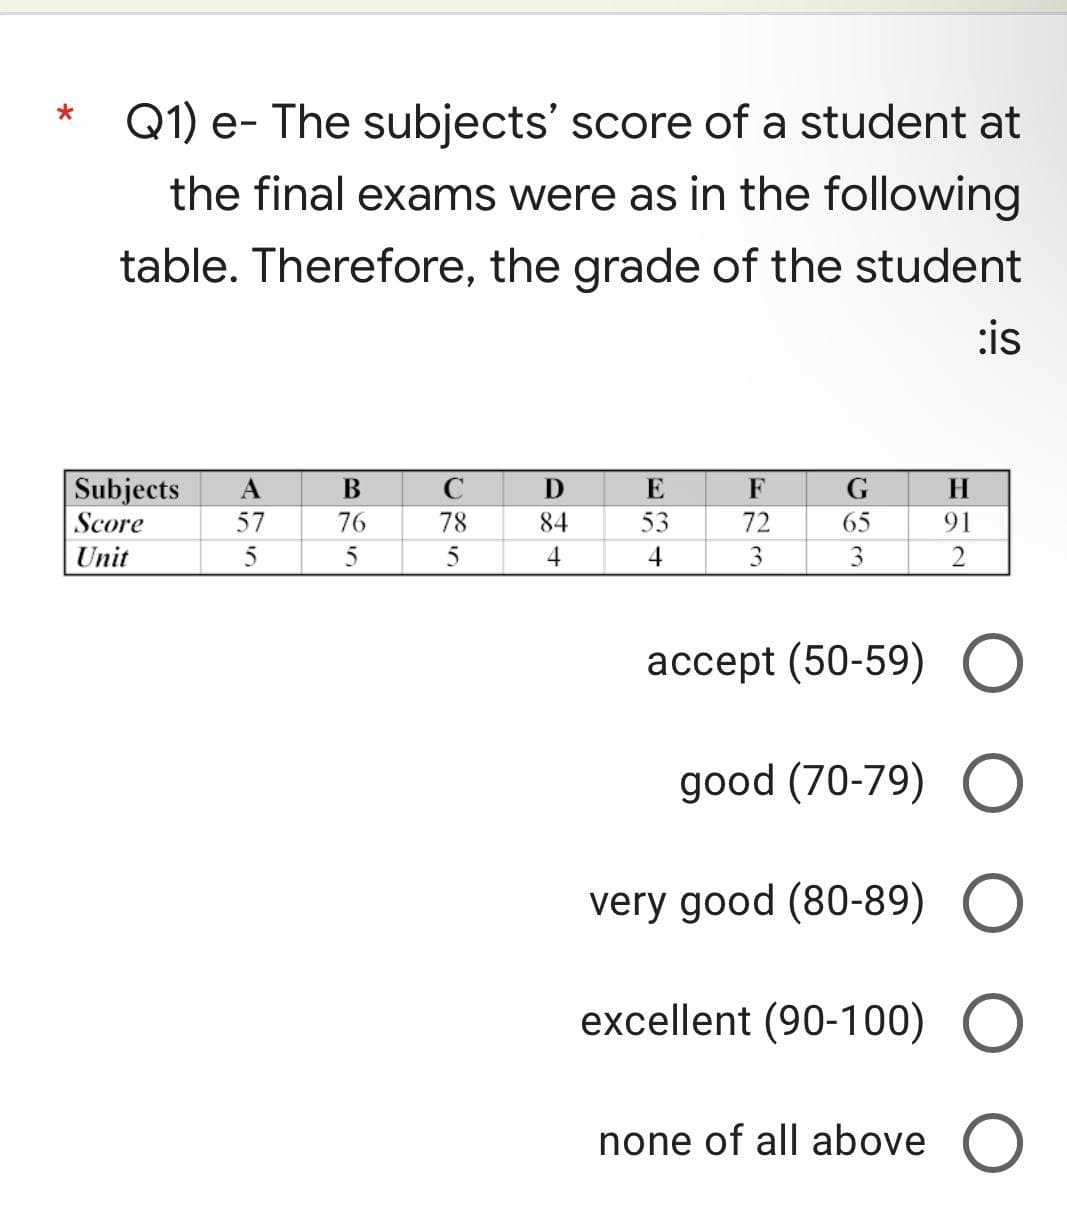 *
Q1) e- The subjects' score of a student at
the final exams were as in the following
table. Therefore, the grade of the student
:is
B
D
E
F
G
H
Subjects A
Score
57
76
84
53
72
65
91
Unit
5
4
4
3
accept (50-59) O
good (70-79)
very good (80-89) O
excellent (90-100)
none of all above
O
CRI
с
78
5